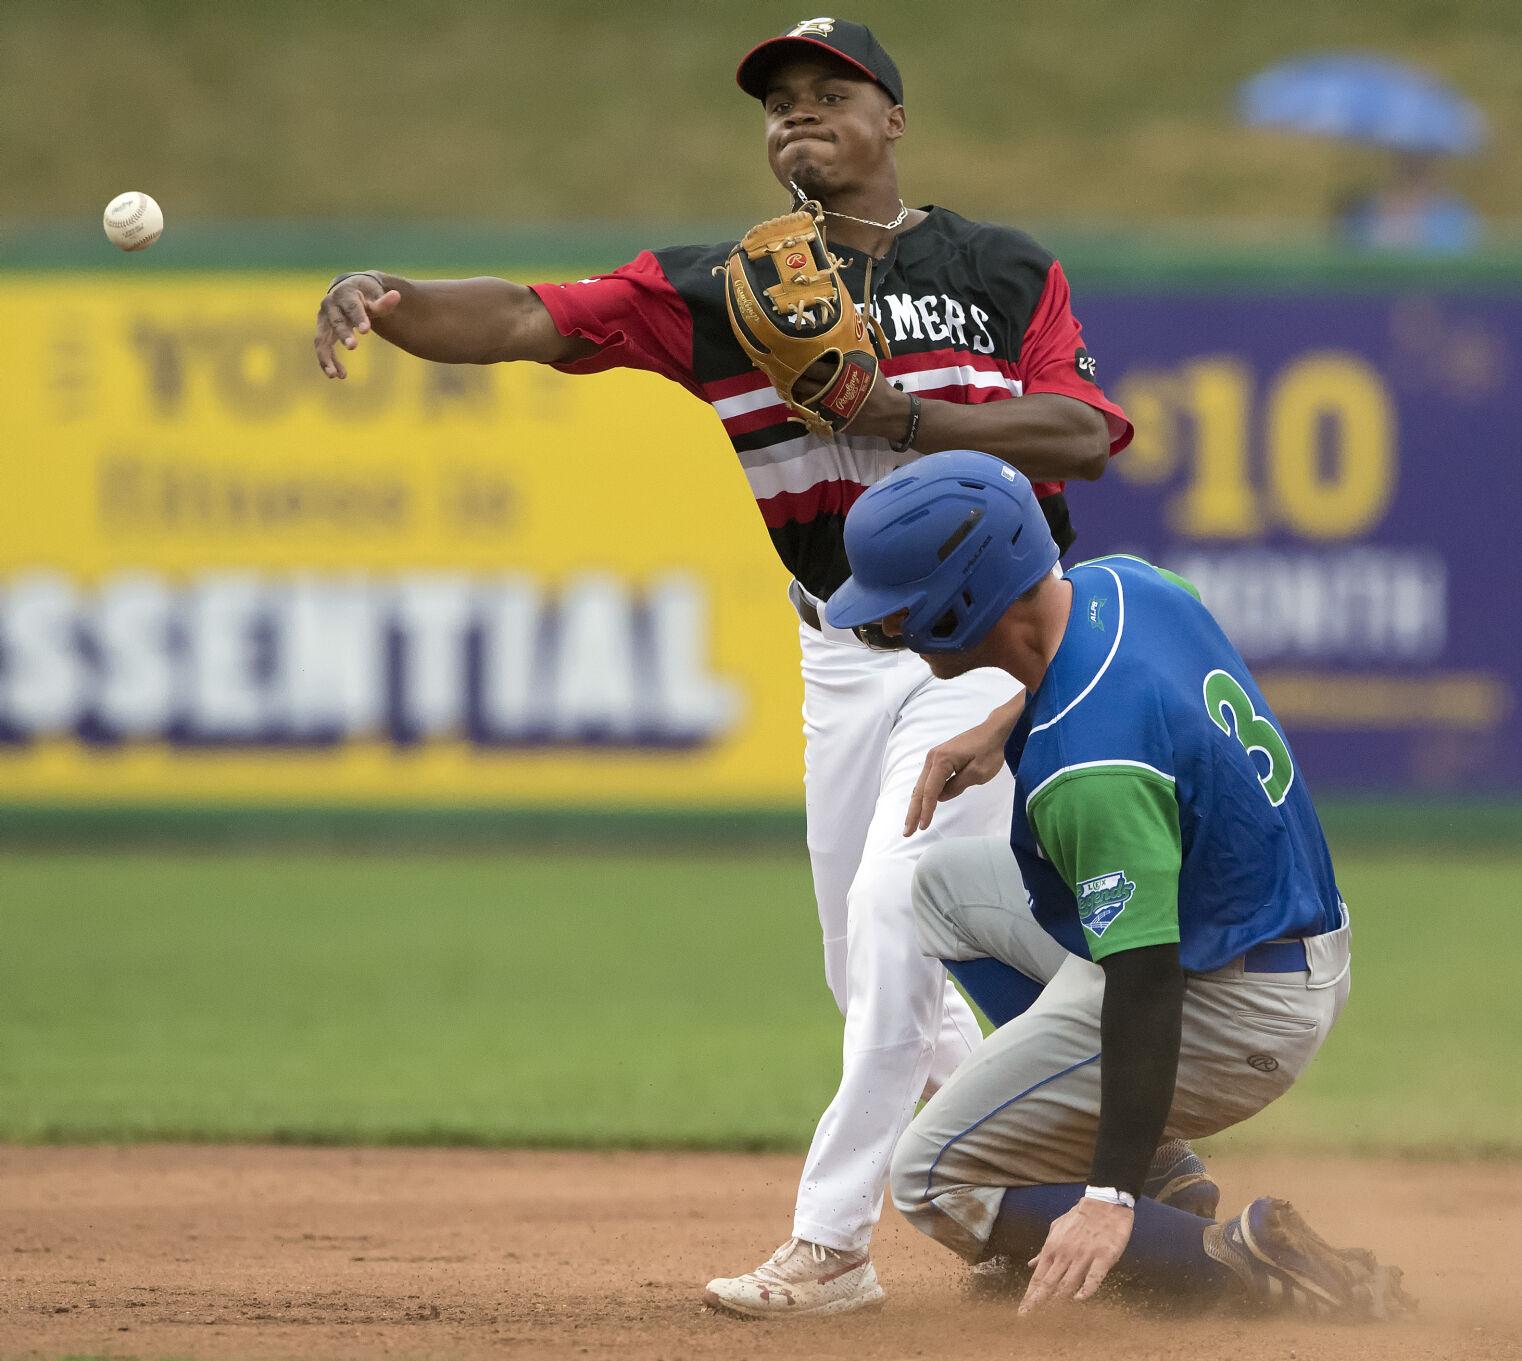 Barnstormers hit the road with a win | Lancaster Barnstormers | lancasteronline.com